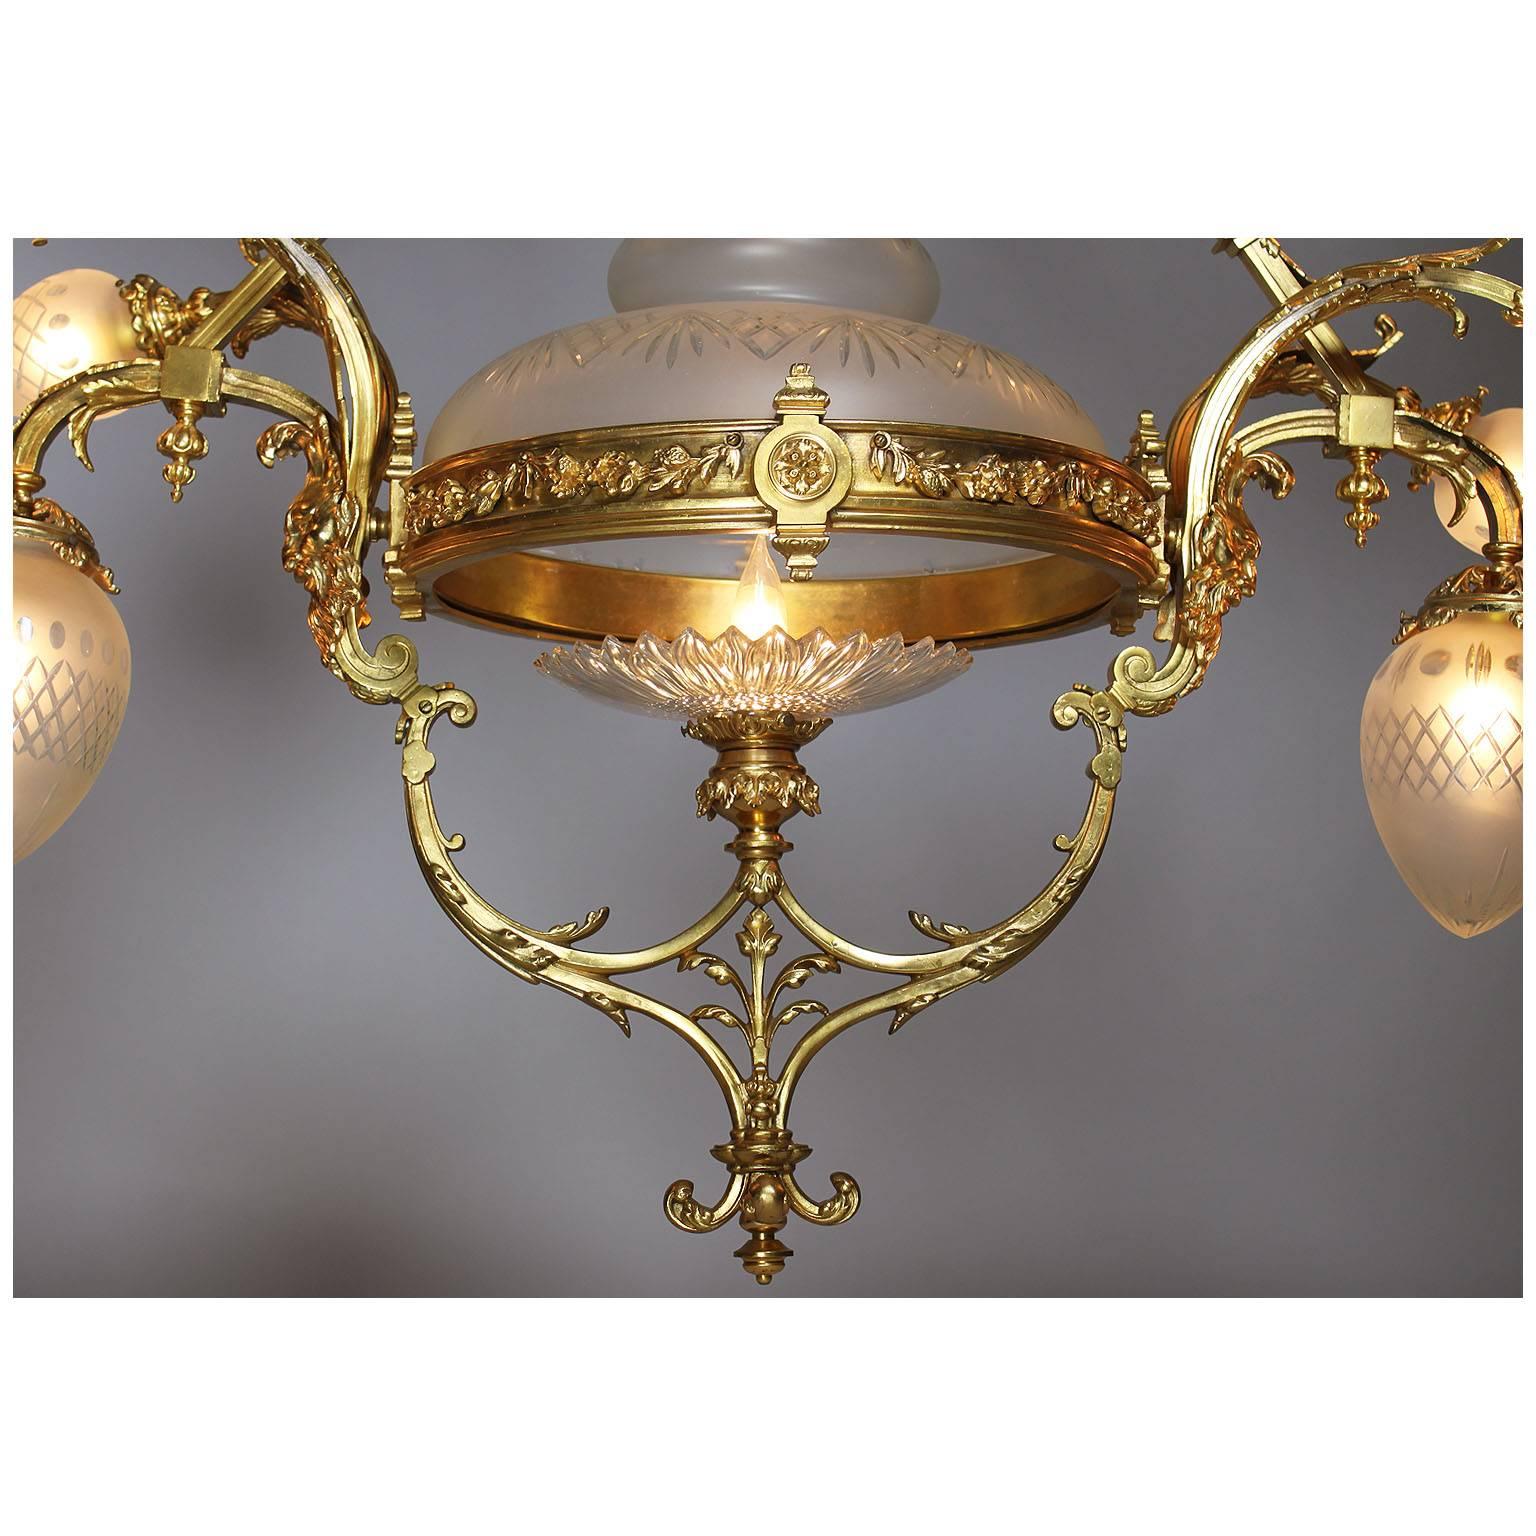 Early 20th Century French Belle Epoque 19th-20th Century Neoclassical Style Gilt-Bronze Chandelier For Sale